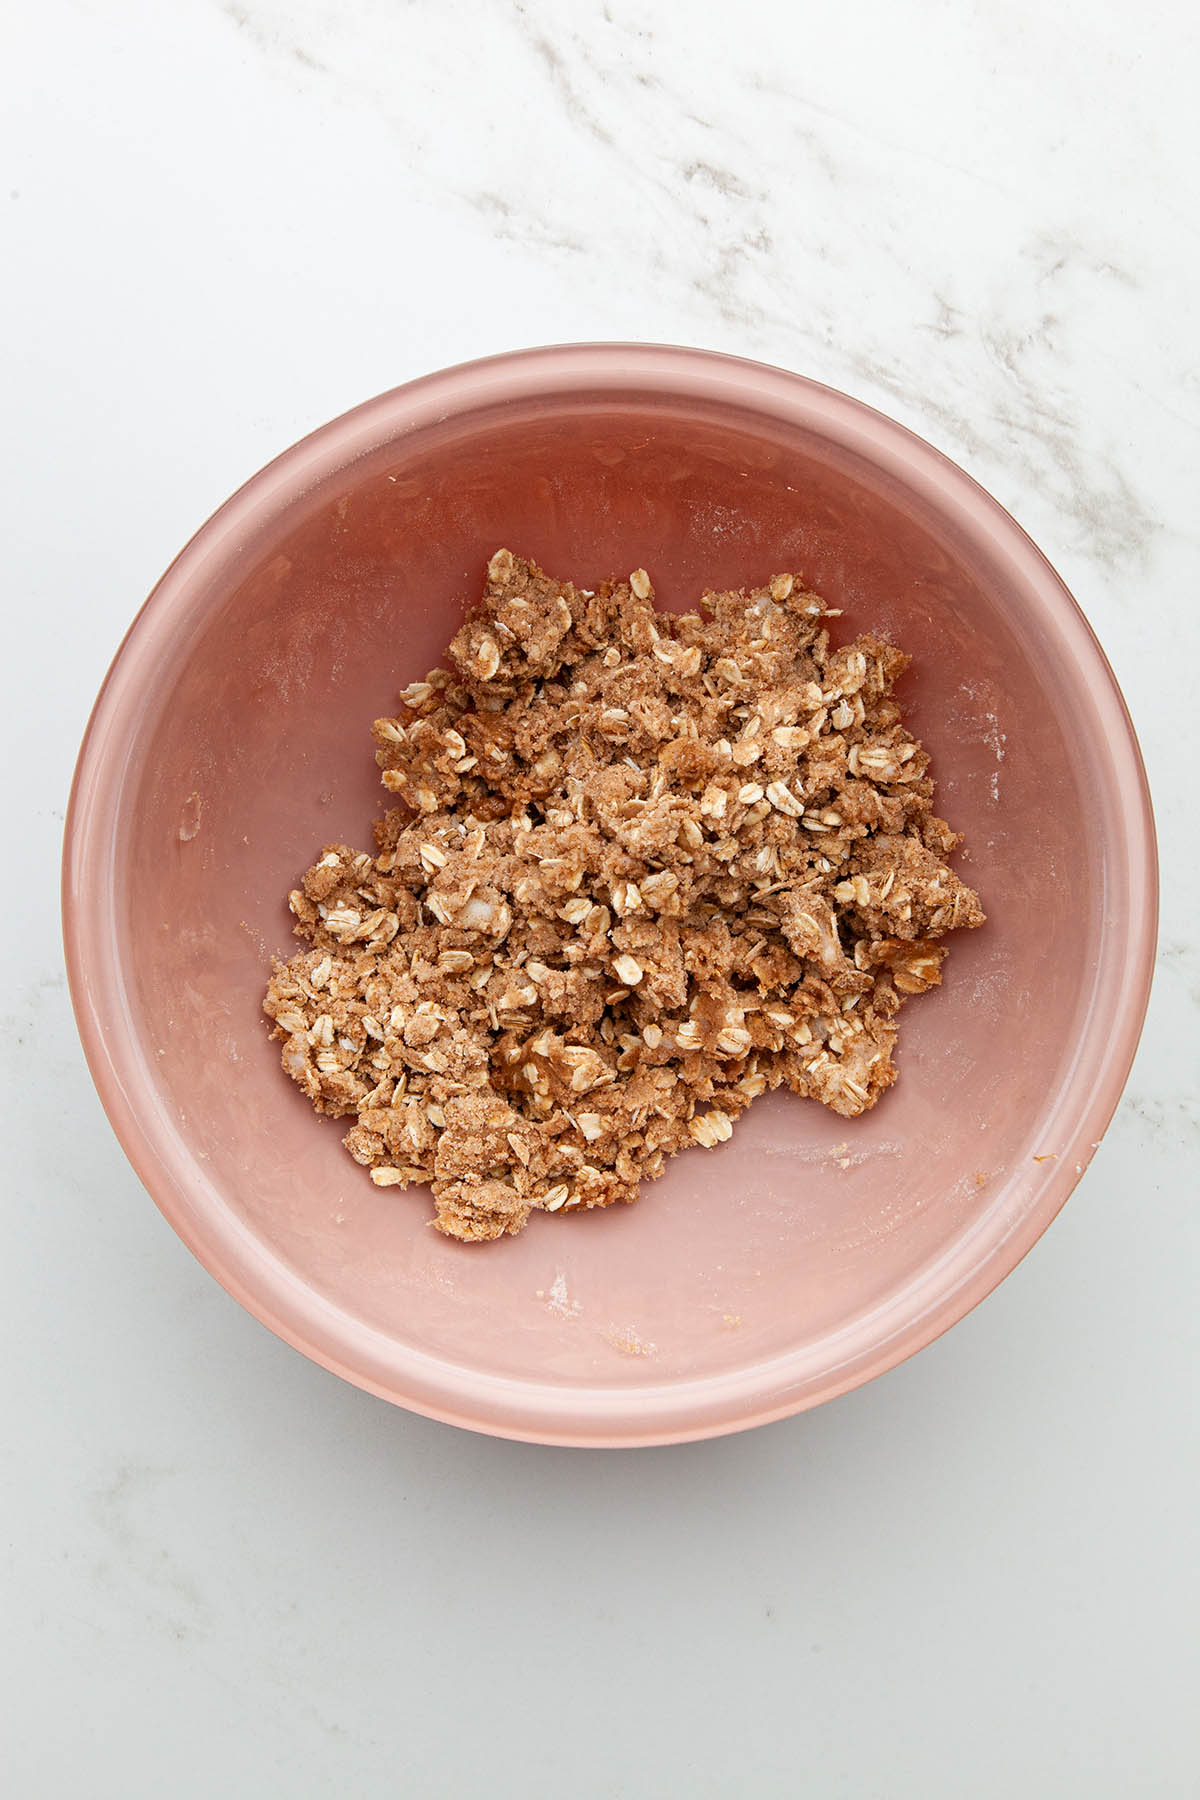 A bowl of mixed oat crumble topping.